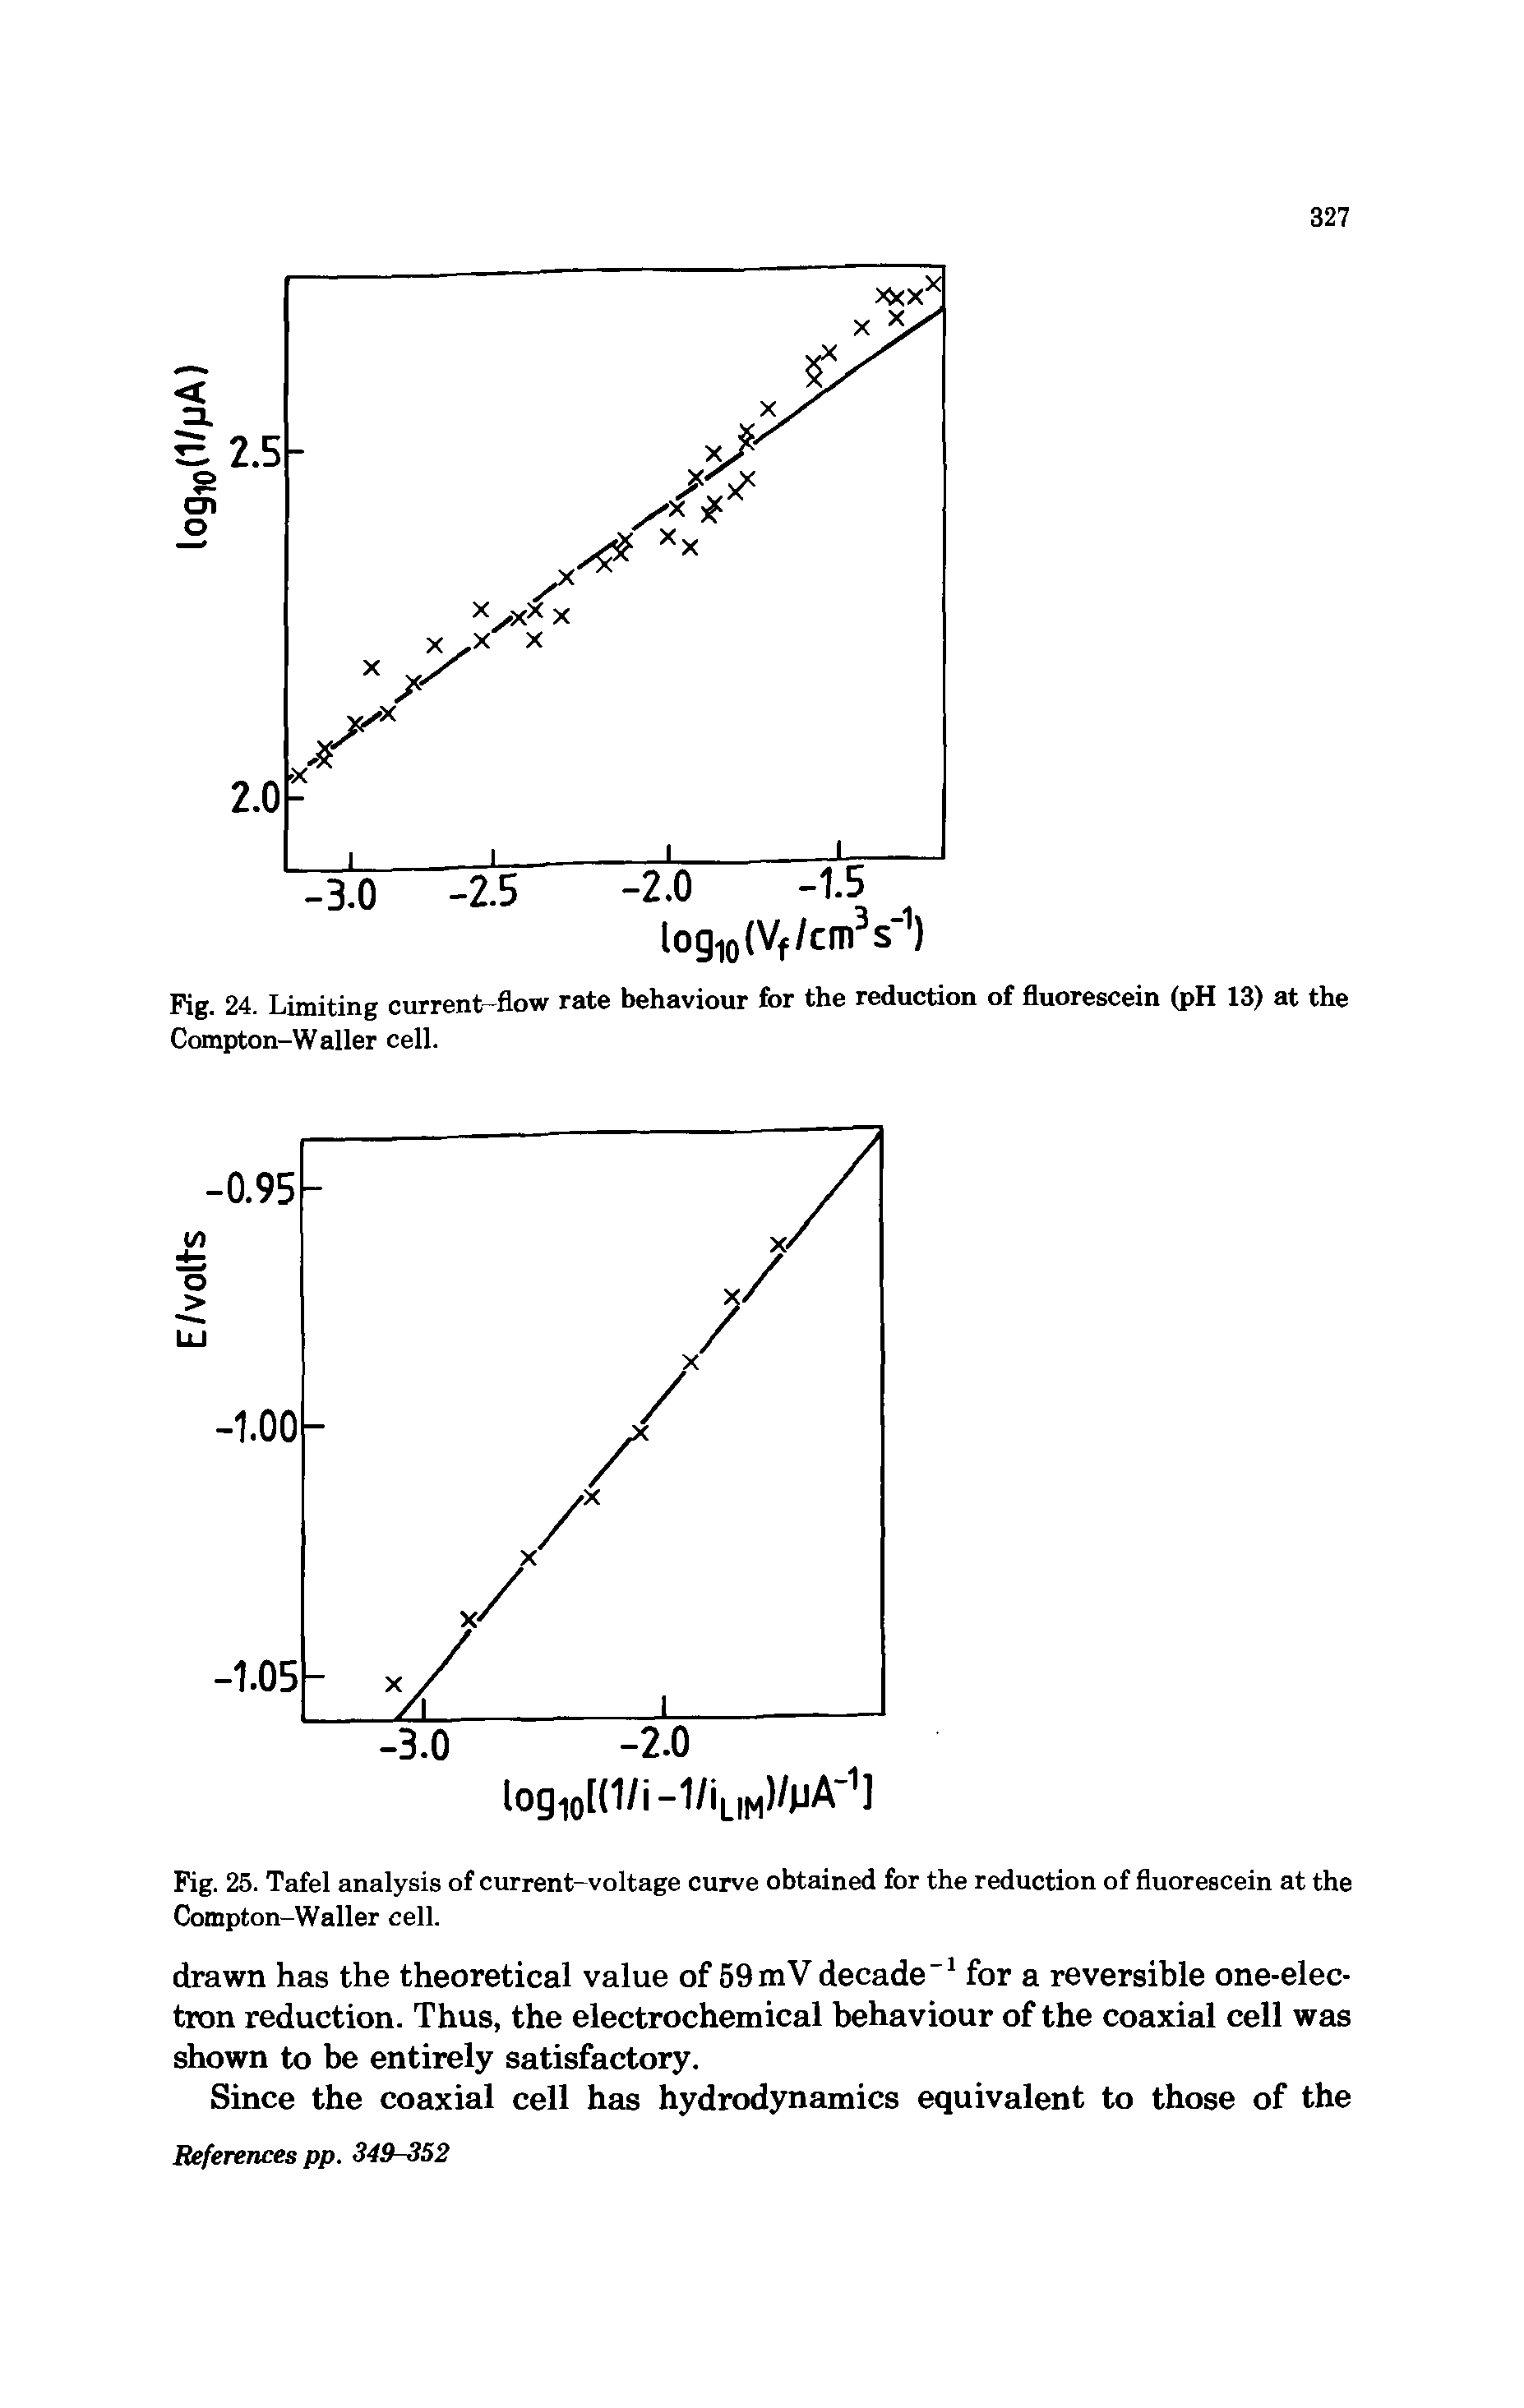 Fig. 25. Tafel analysis of current-voltage curve obtained for the reduction of fluorescein at the Compton-Waller cell.